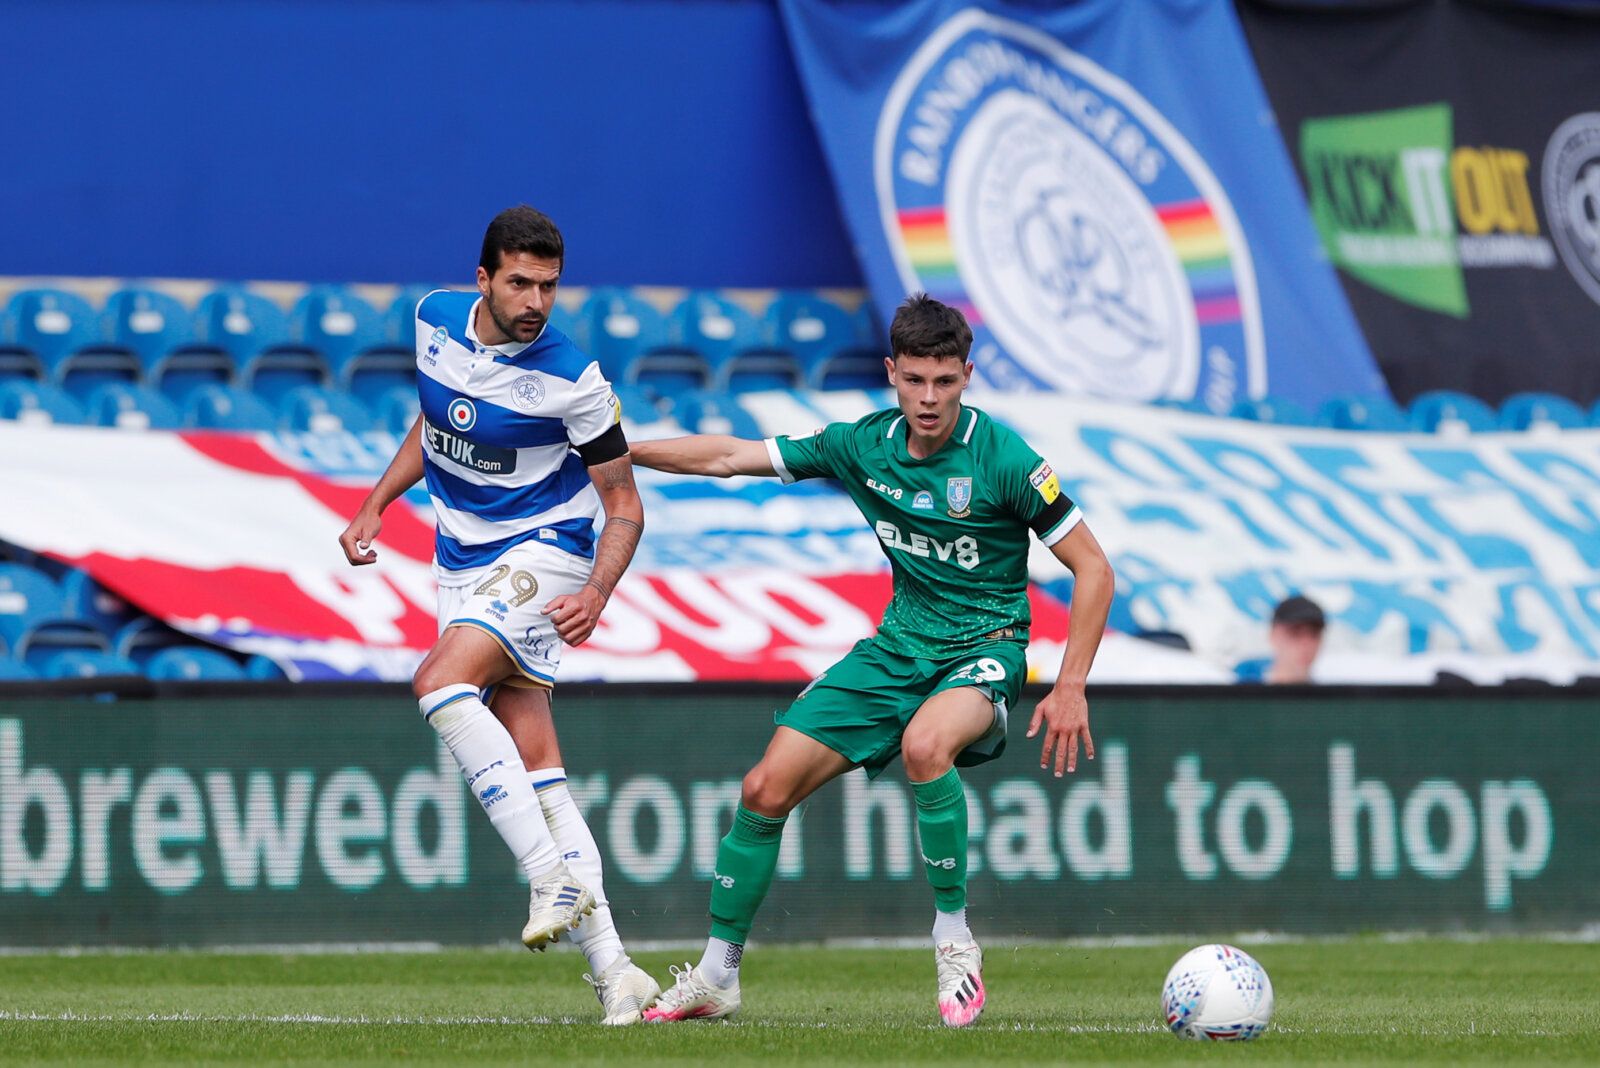 Soccer Football - Championship - Queens Park Rangers v Sheffield Wednesday - Loftus Park, London, Britain - July 11, 2020   Queens Park Rangers' Yoann Barbet in action with Sheffield Wednesday's Alex Hunt, as play resumes behind closed doors following the outbreak of the coronavirus disease (COVID-19)   Action Images/Andrew Couldridge    EDITORIAL USE ONLY. No use with unauthorized audio, video, data, fixture lists, club/league logos or 